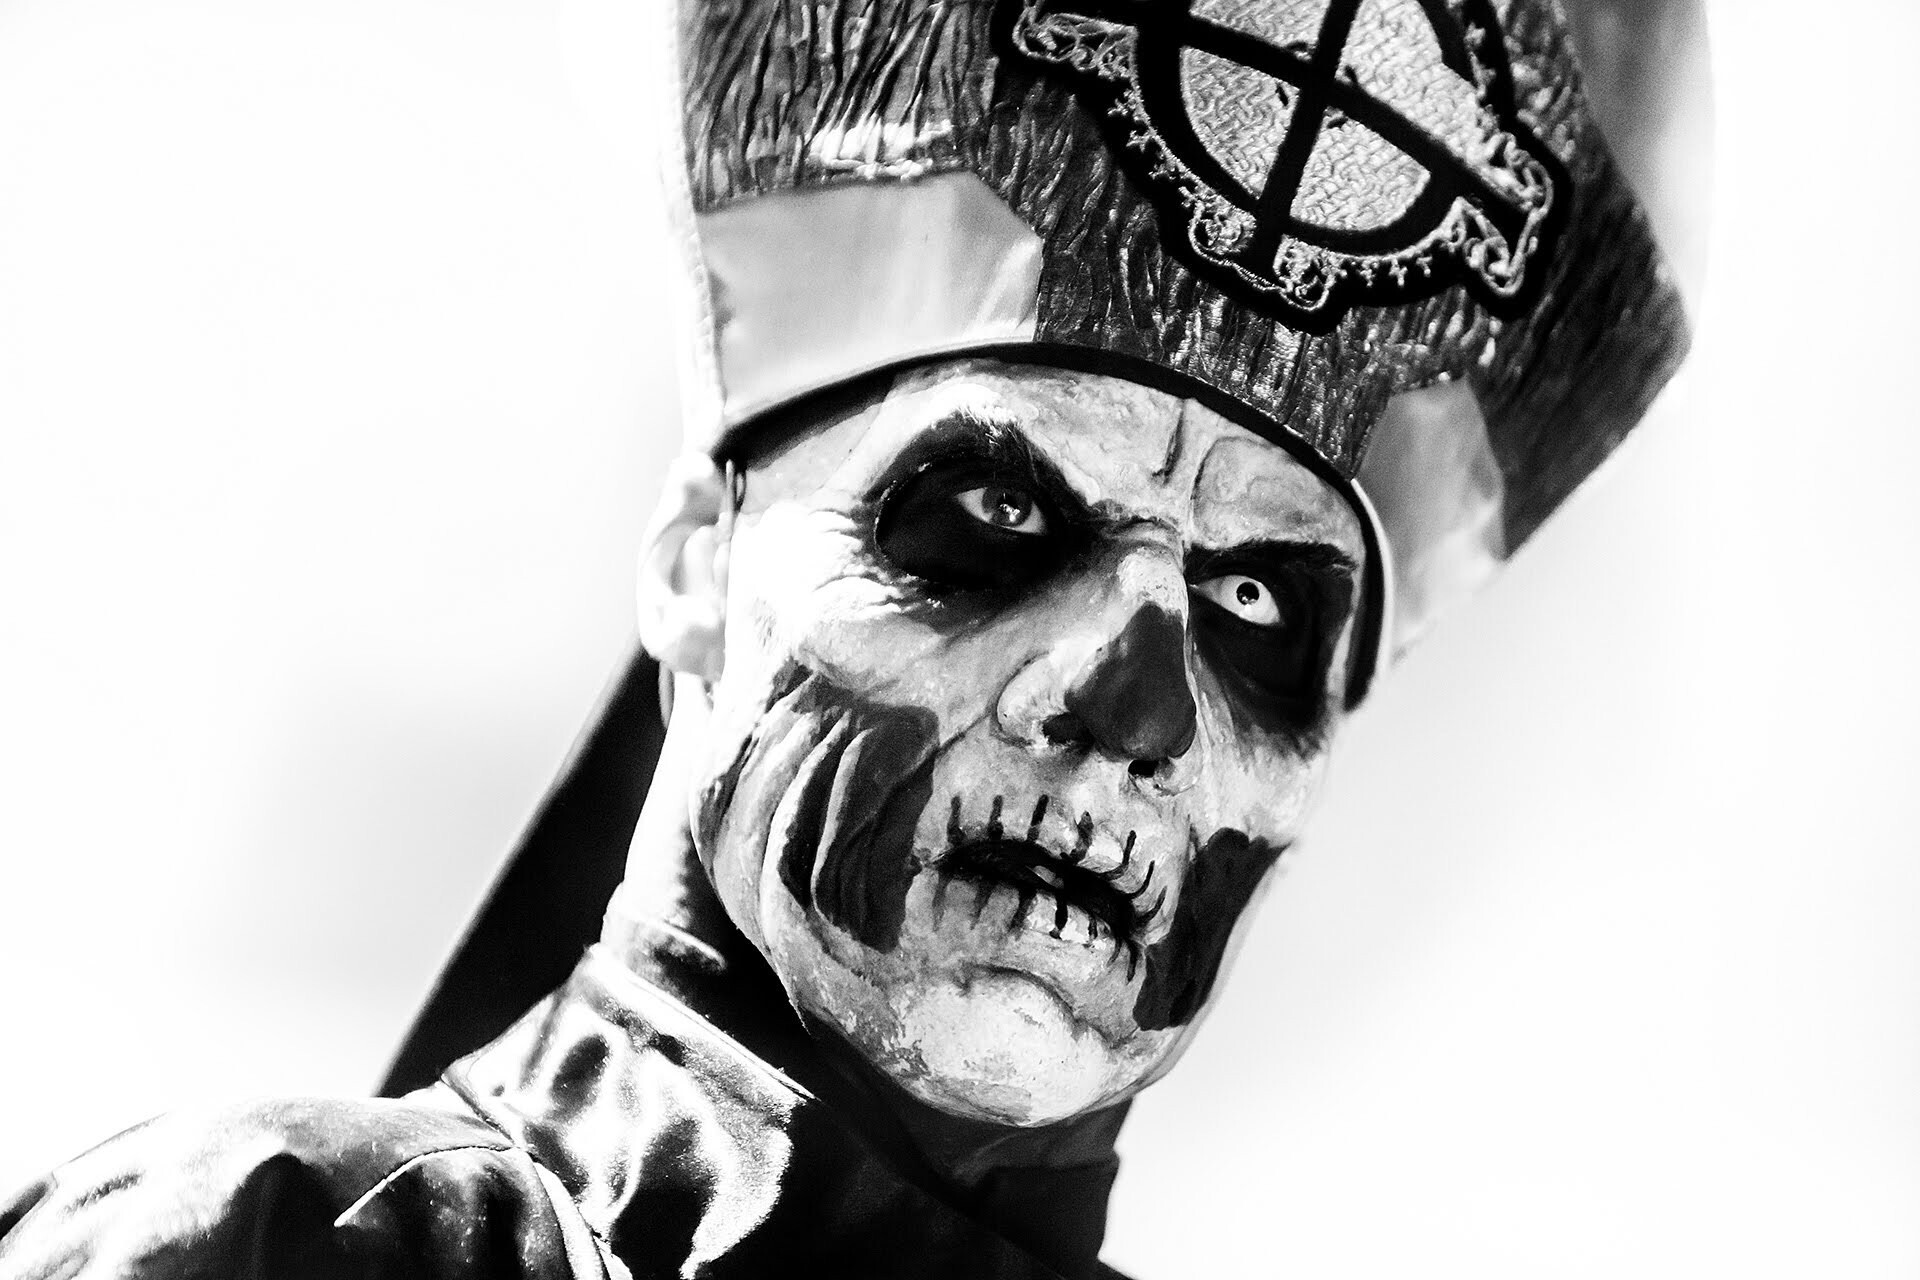 Ghost (Band): A member of the Group of Nameless Ghouls, A Ghoul Writer, Cardinal Copia. 1920x1280 HD Wallpaper.